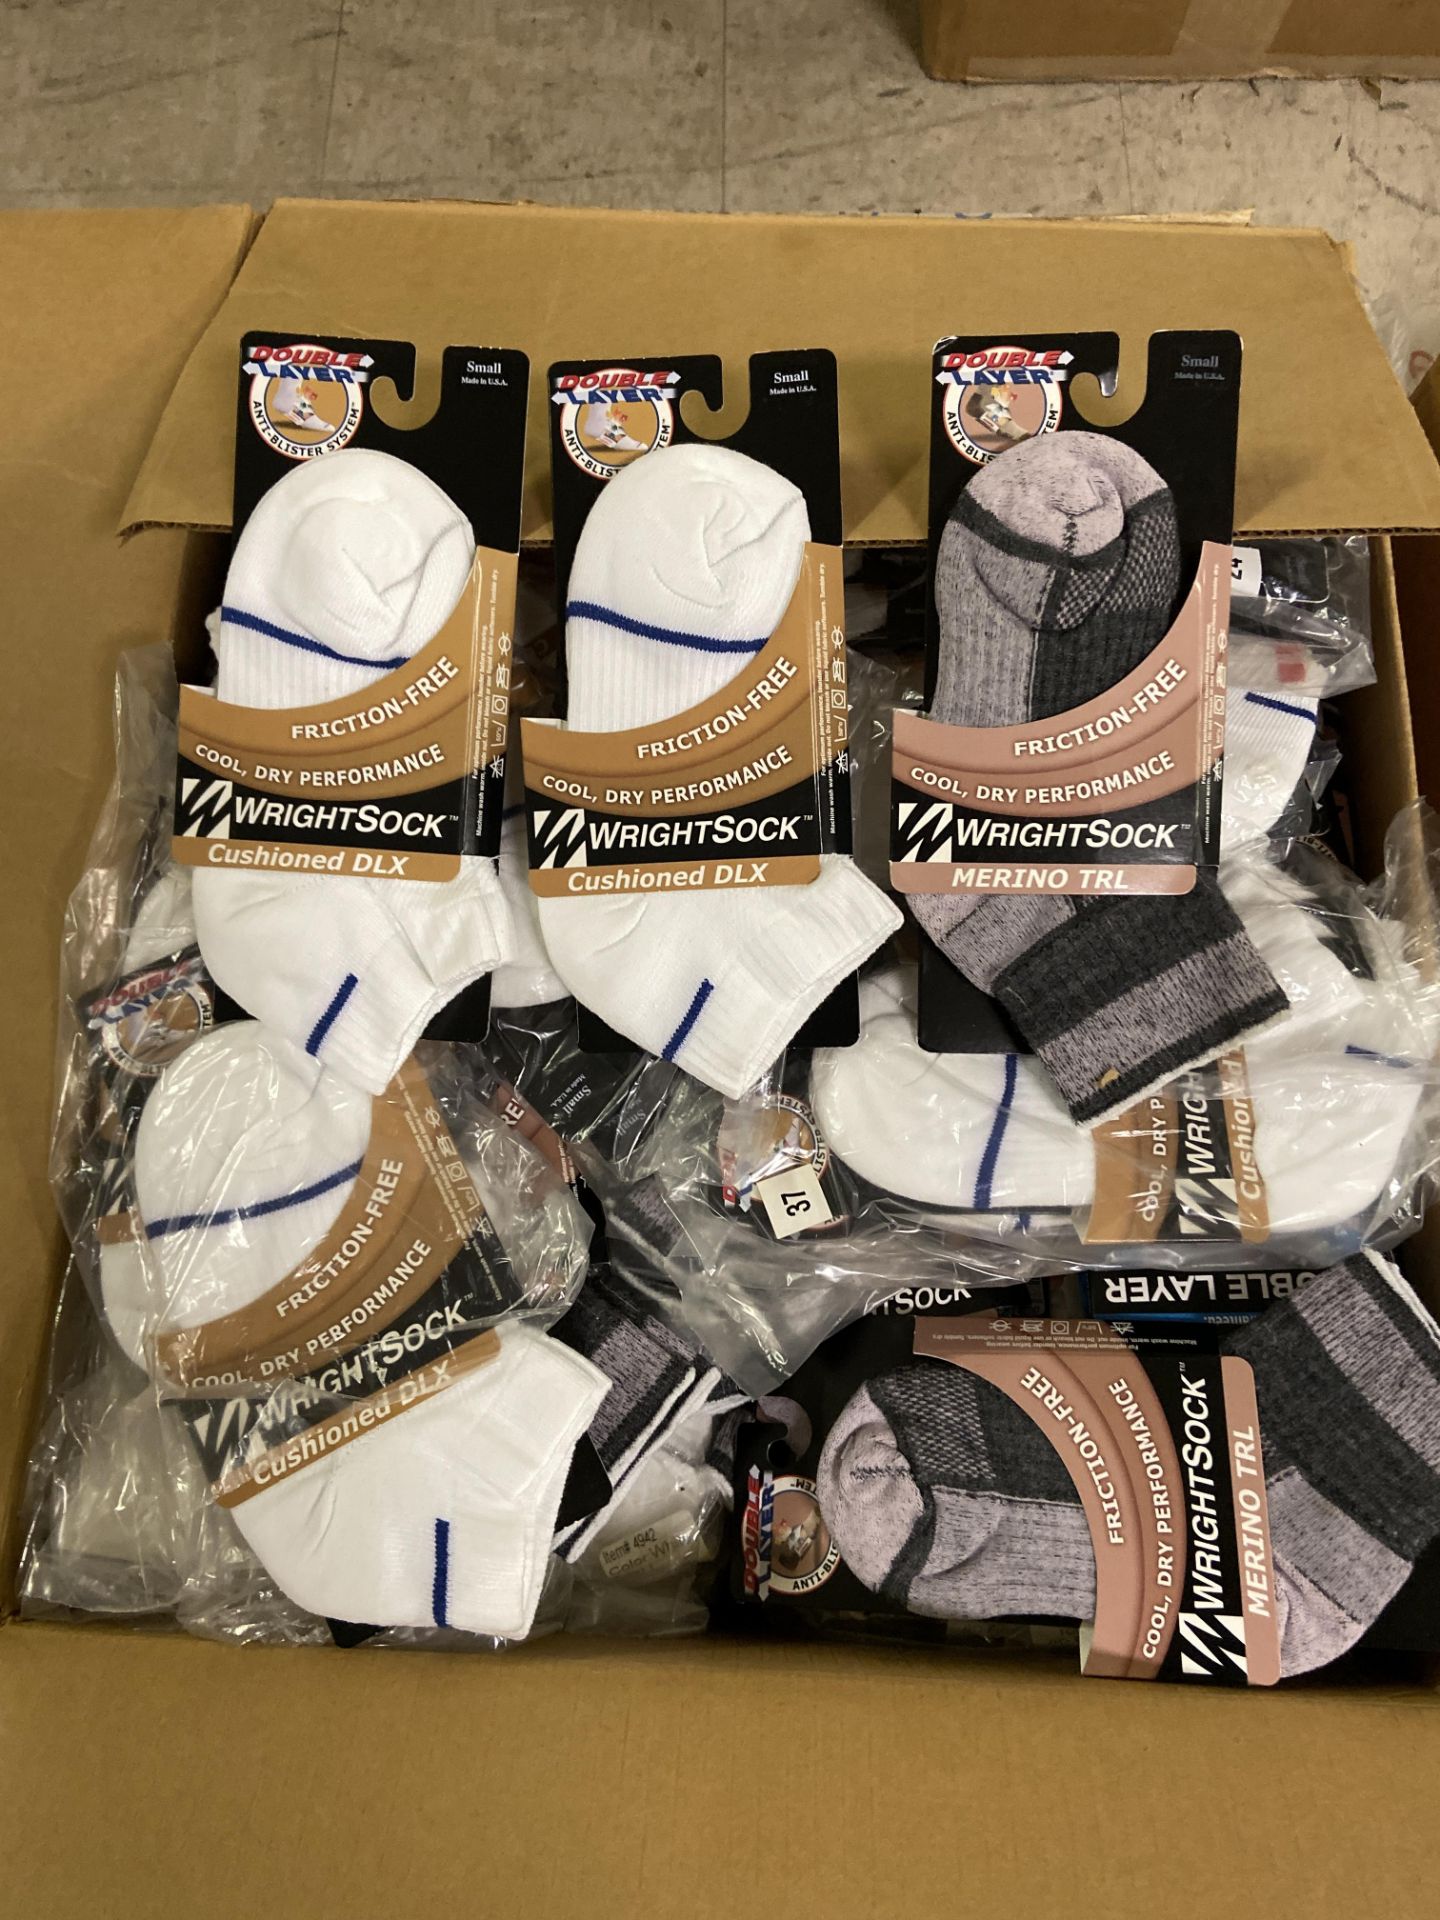 250+ packs of New Socks, Wrightsock Cushioned DLX and Merino TRL, Double Layer, Various Colors